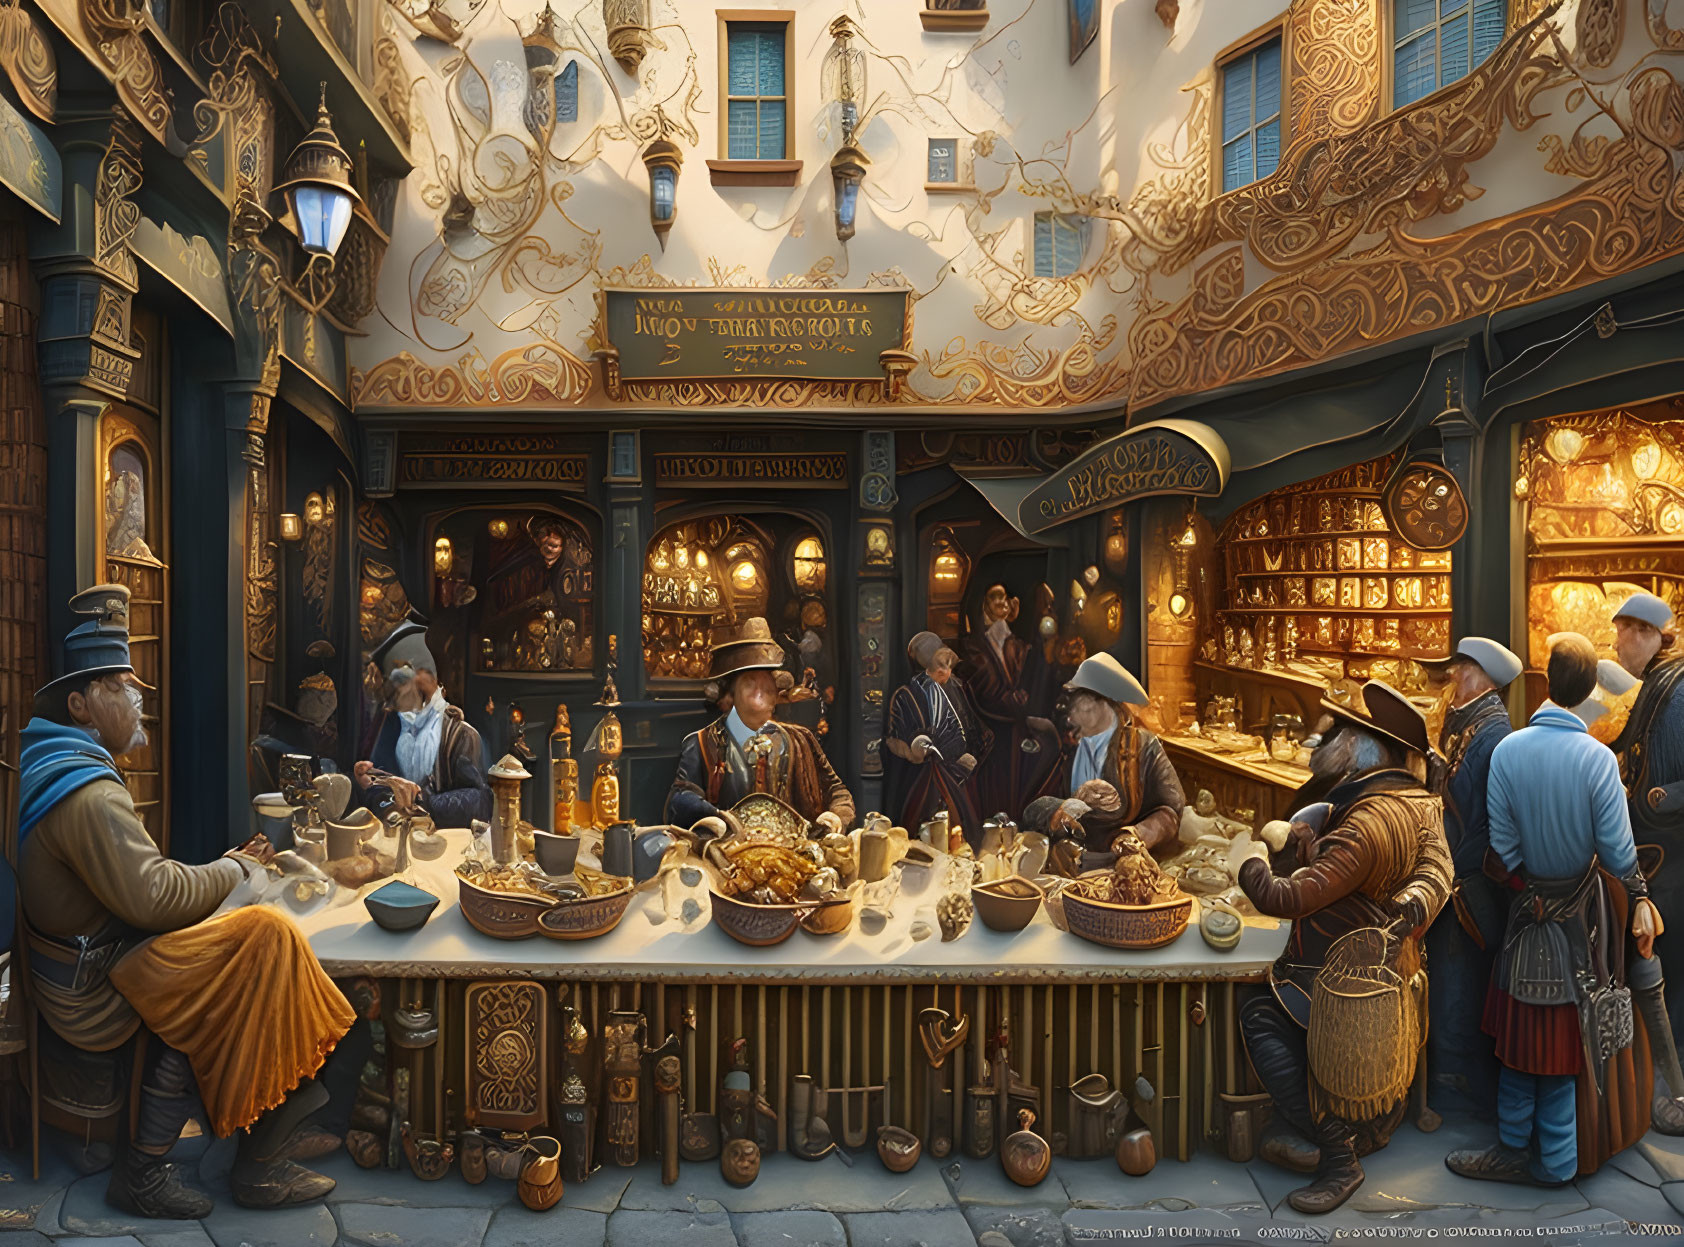 Detailed Old-Time Marketplace Scene with Vendors, Customers, and Abundance of Goods